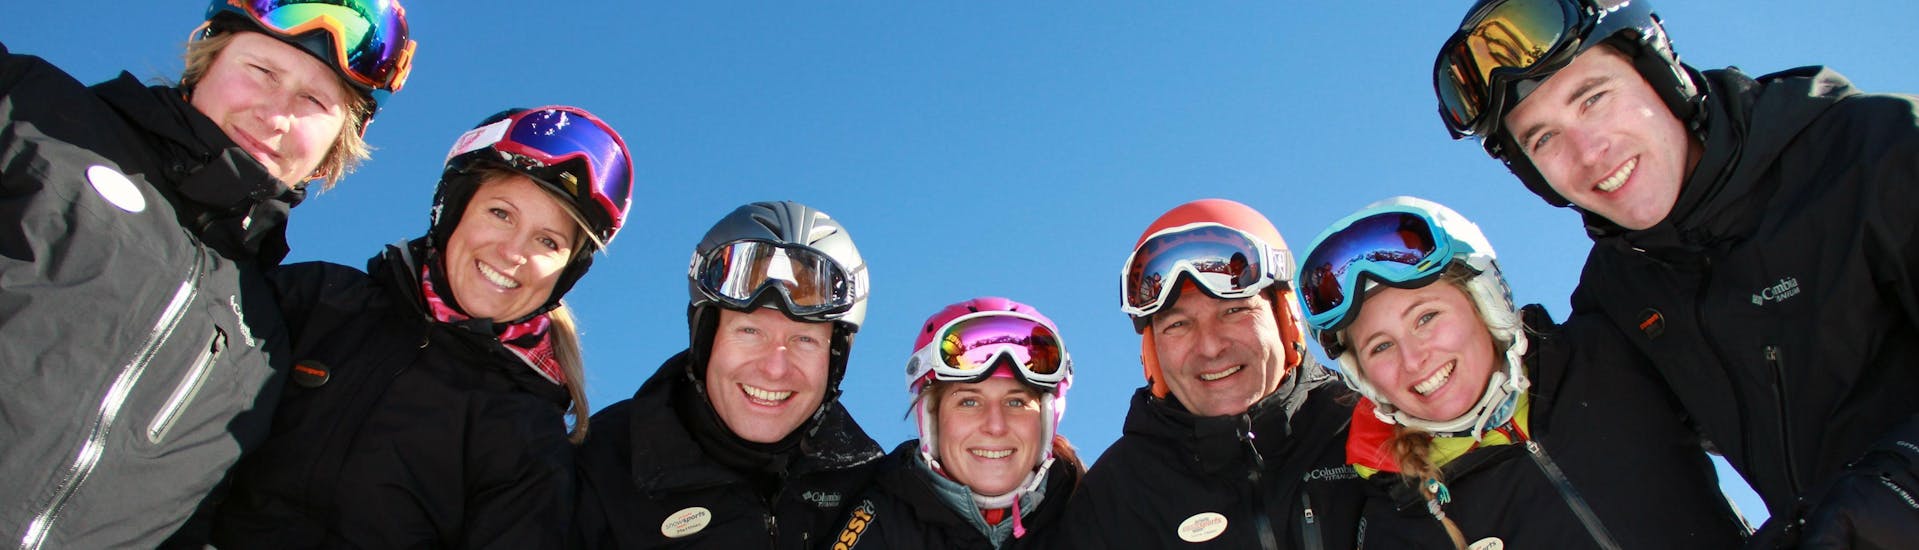 Private Ski Lessons for Adults of All Levels - Full Day with Private Snowsports Team Gstaad - Hero image